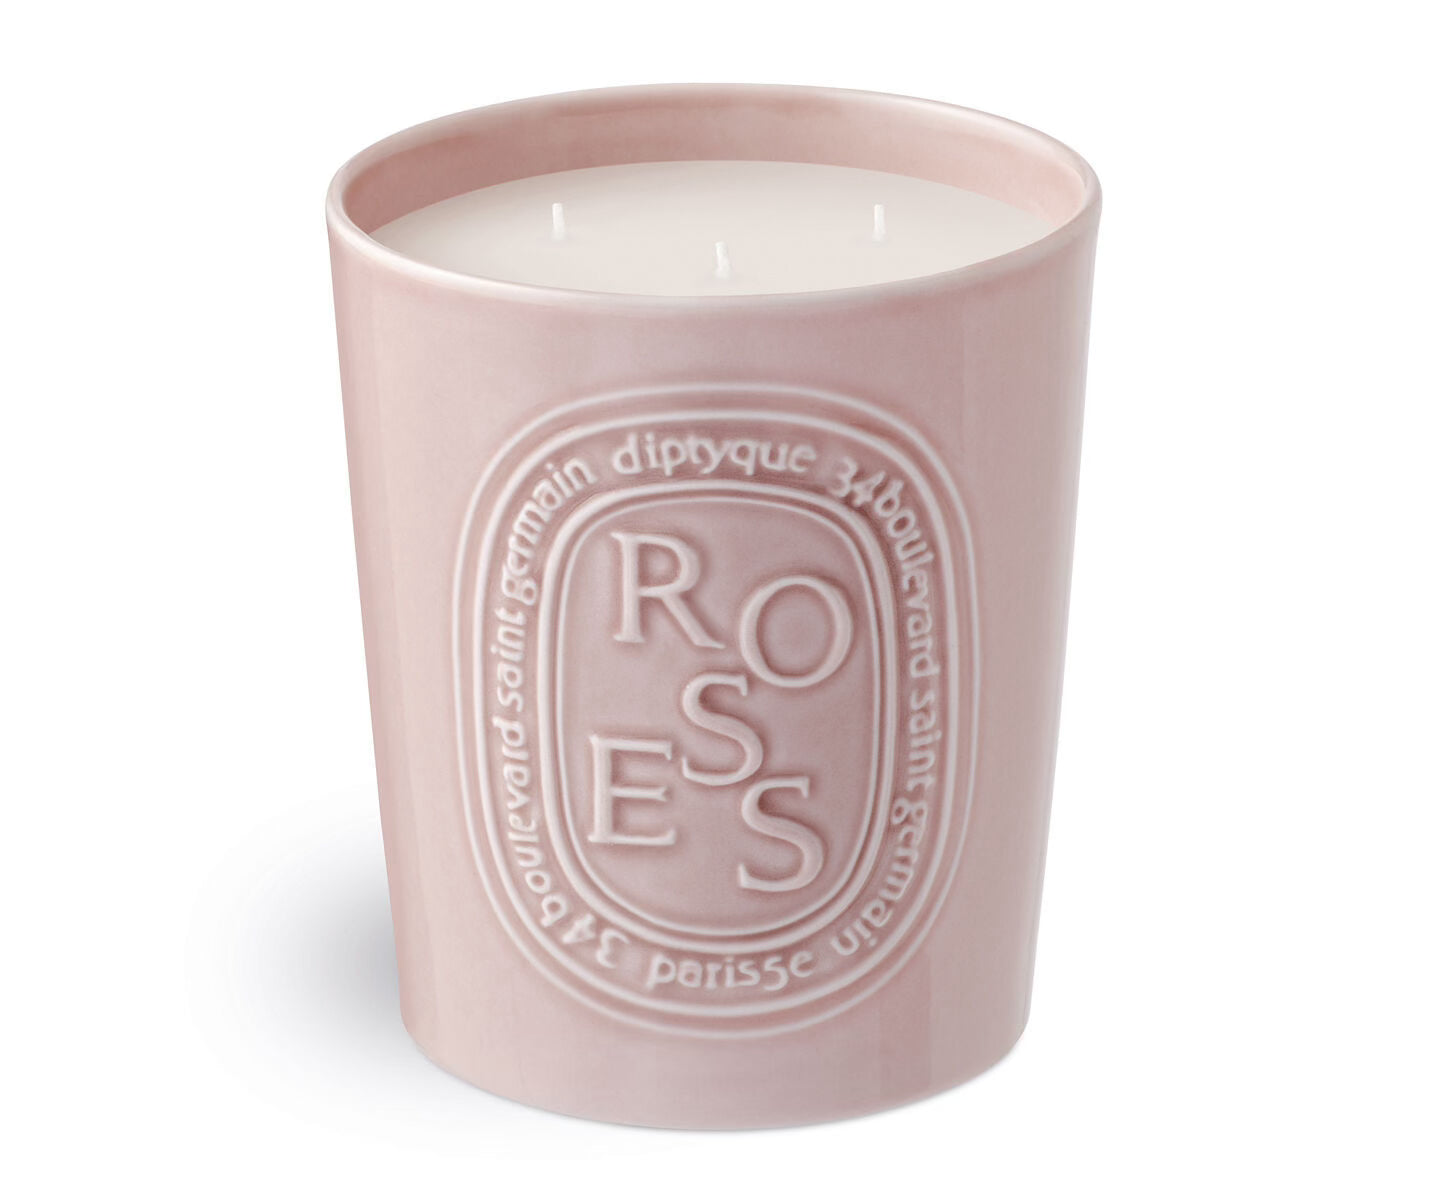 Diptyque Roses